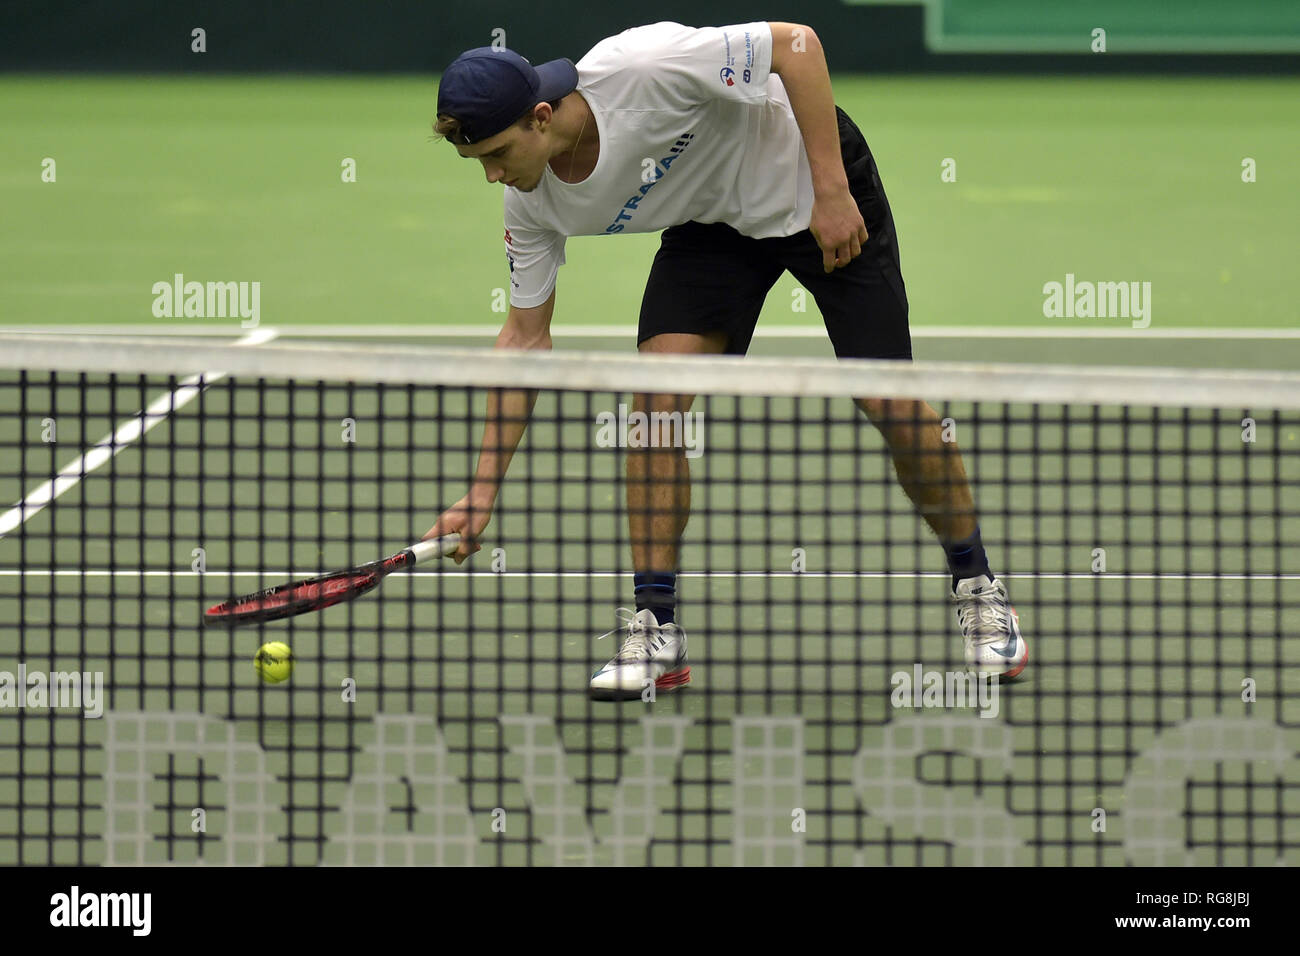 Ostrava Czech Republic 28th January 2019 Czech Tennis Player Tomas Machac In Action During The Training Session In Ostrava Czech Republic January 28 2019 In The New Davis Cup Format The Winner